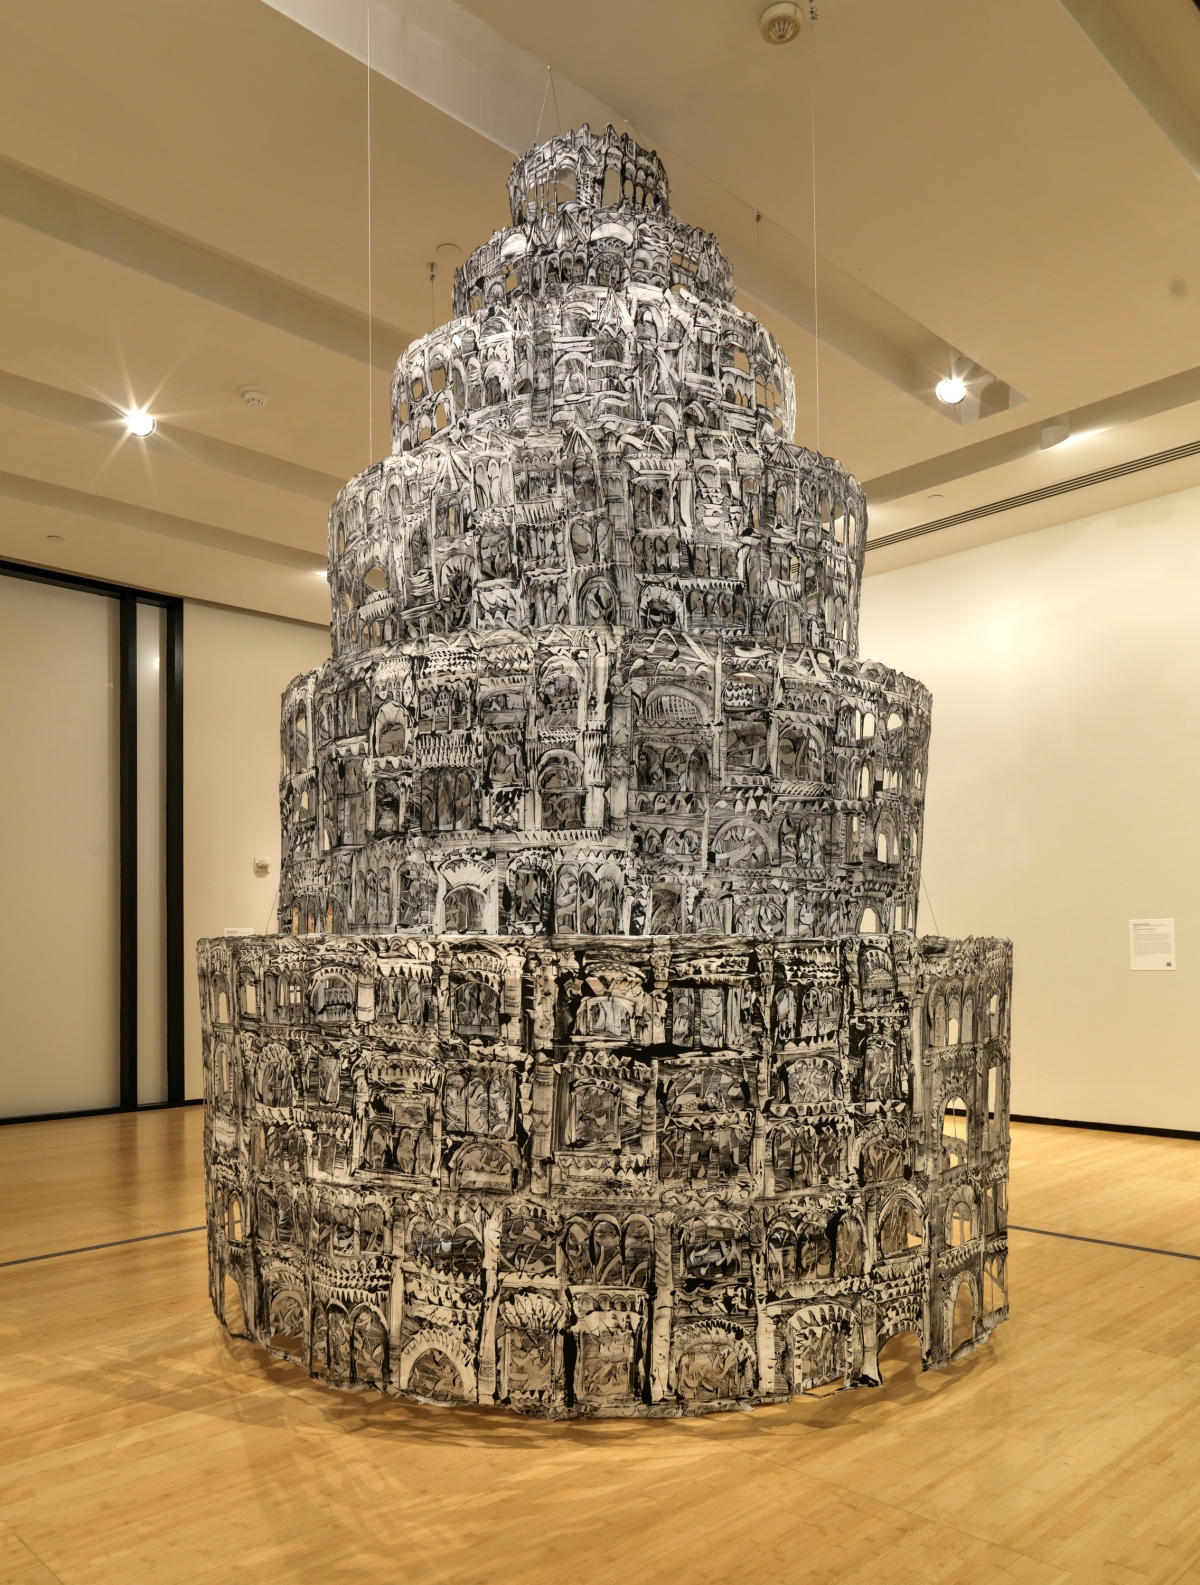 Installation view, Asia Society Triennial: "We Do Not Dream Alone," Asia Society Museum, New York, 2020. Kevork Mourad, Seeing Through Babel, 2019, Courtesy of the Artist. Photograph: Bruce M. White, 2020.